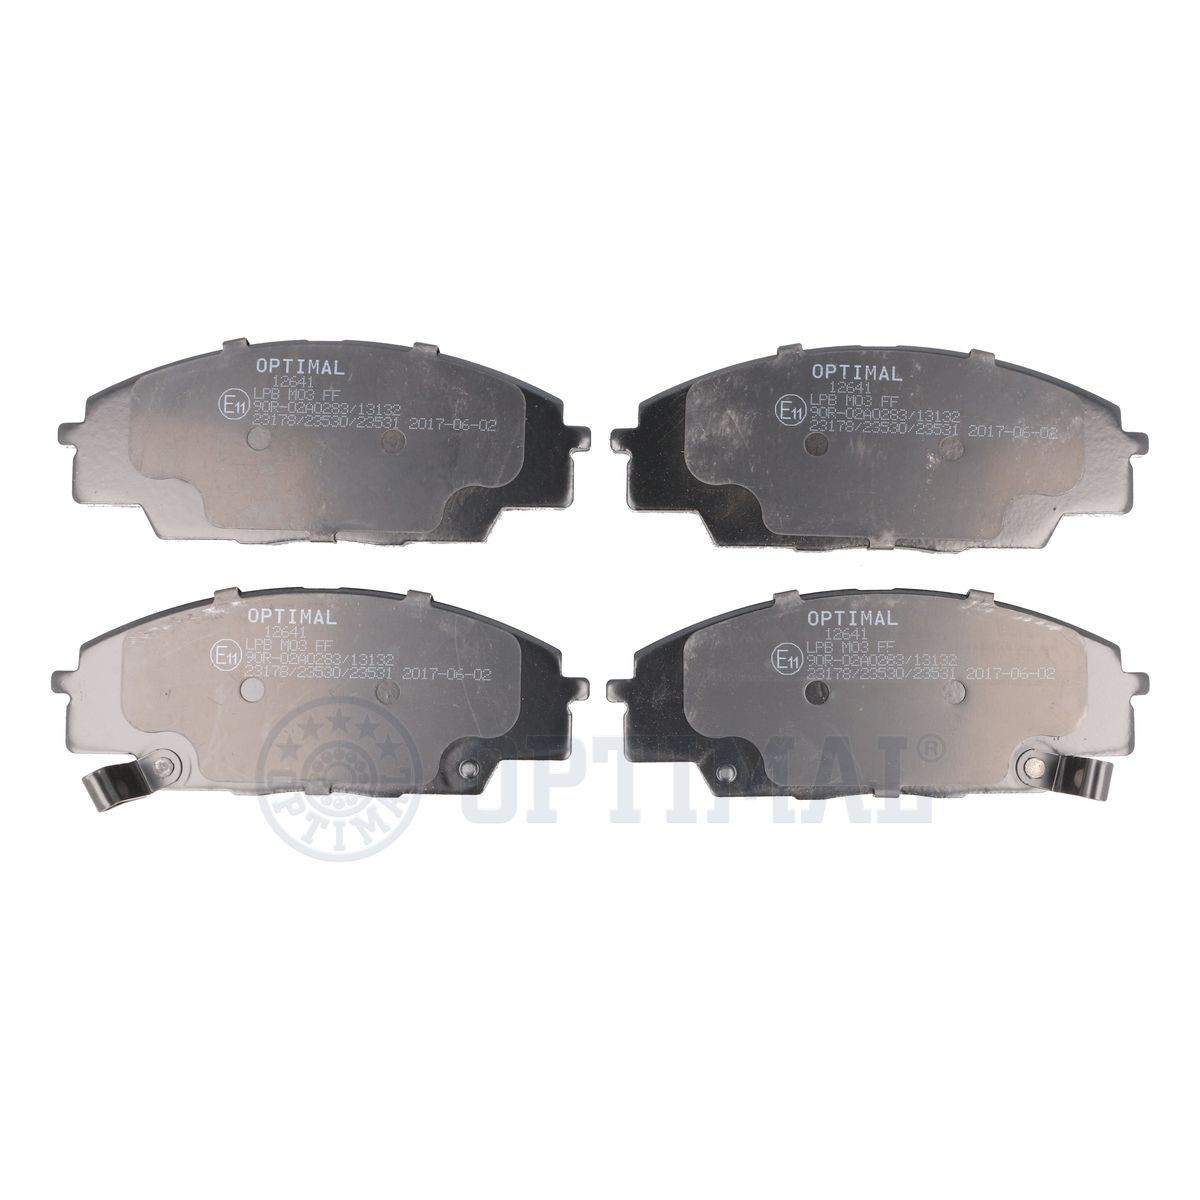 OPTIMAL BP-12641 Brake pad set Front Axle, with acoustic wear warning